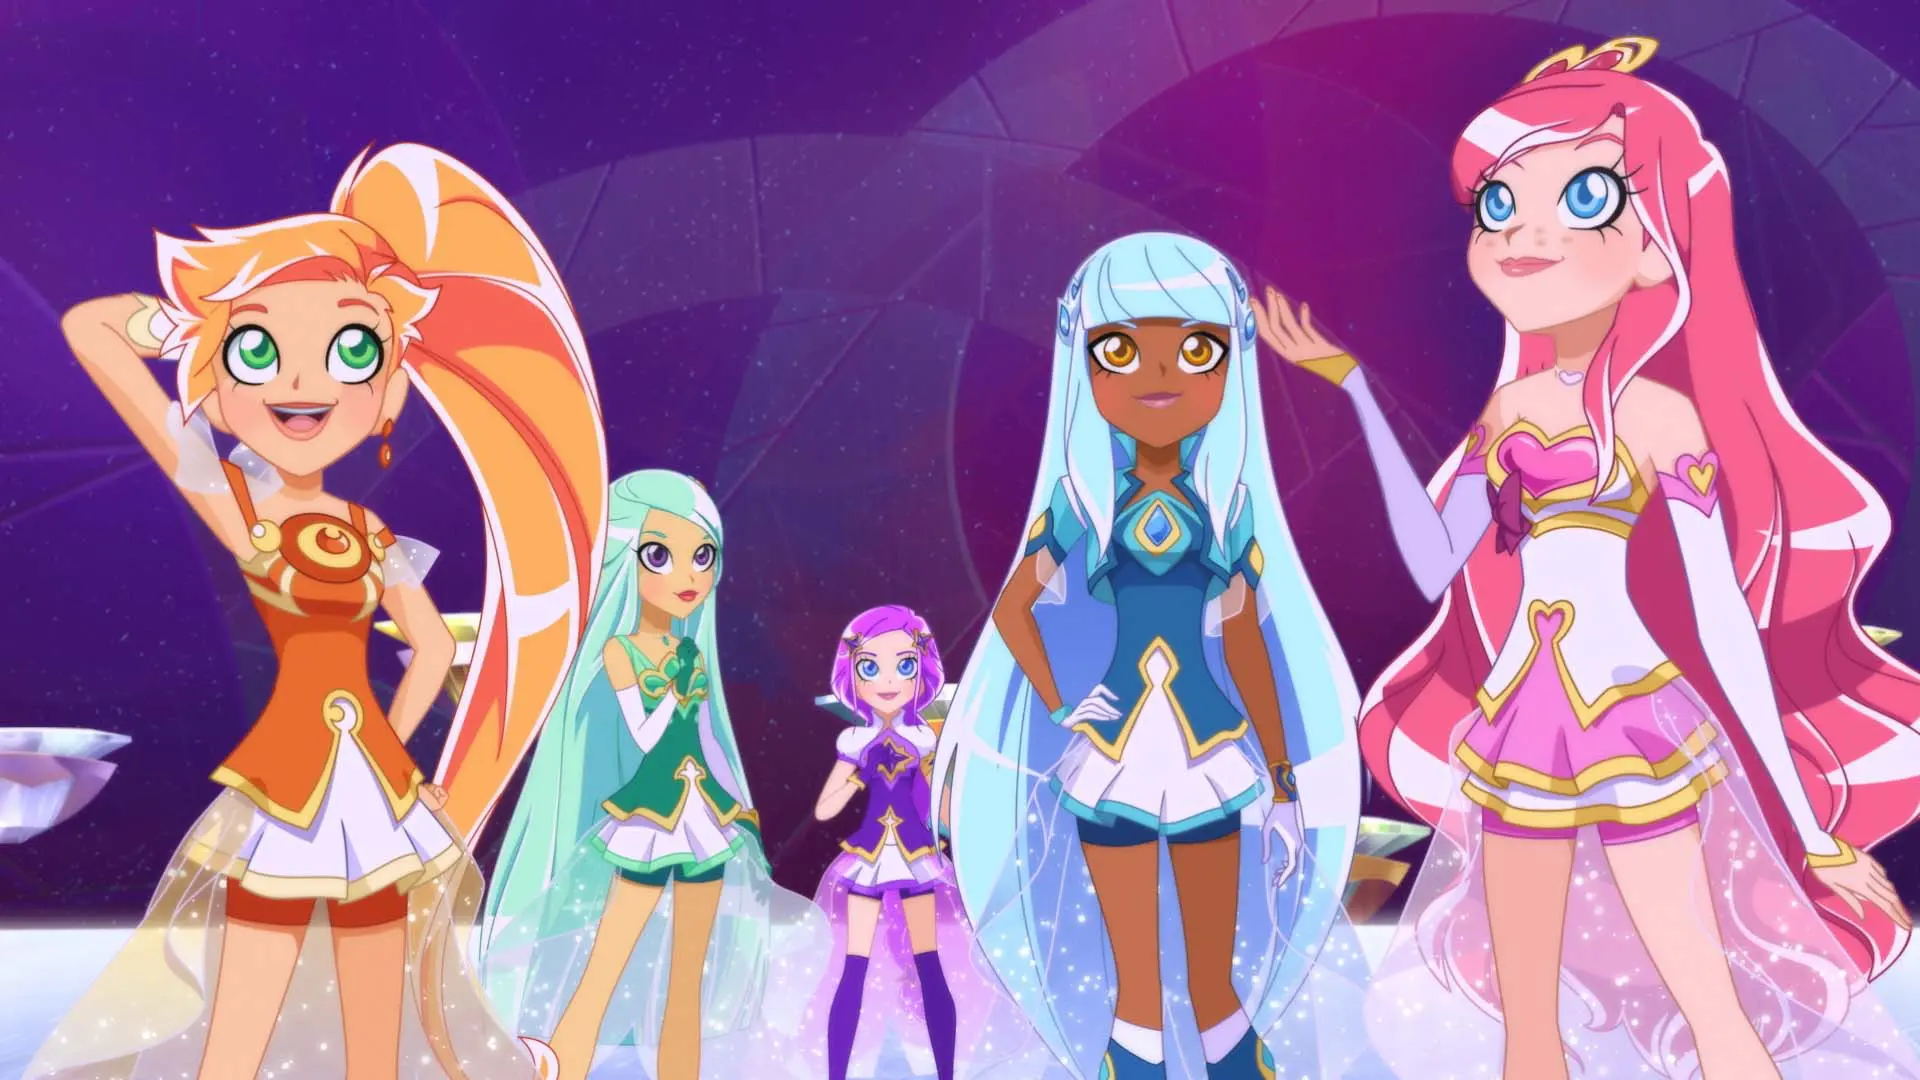 LoliRock Joins the Magical Girls!